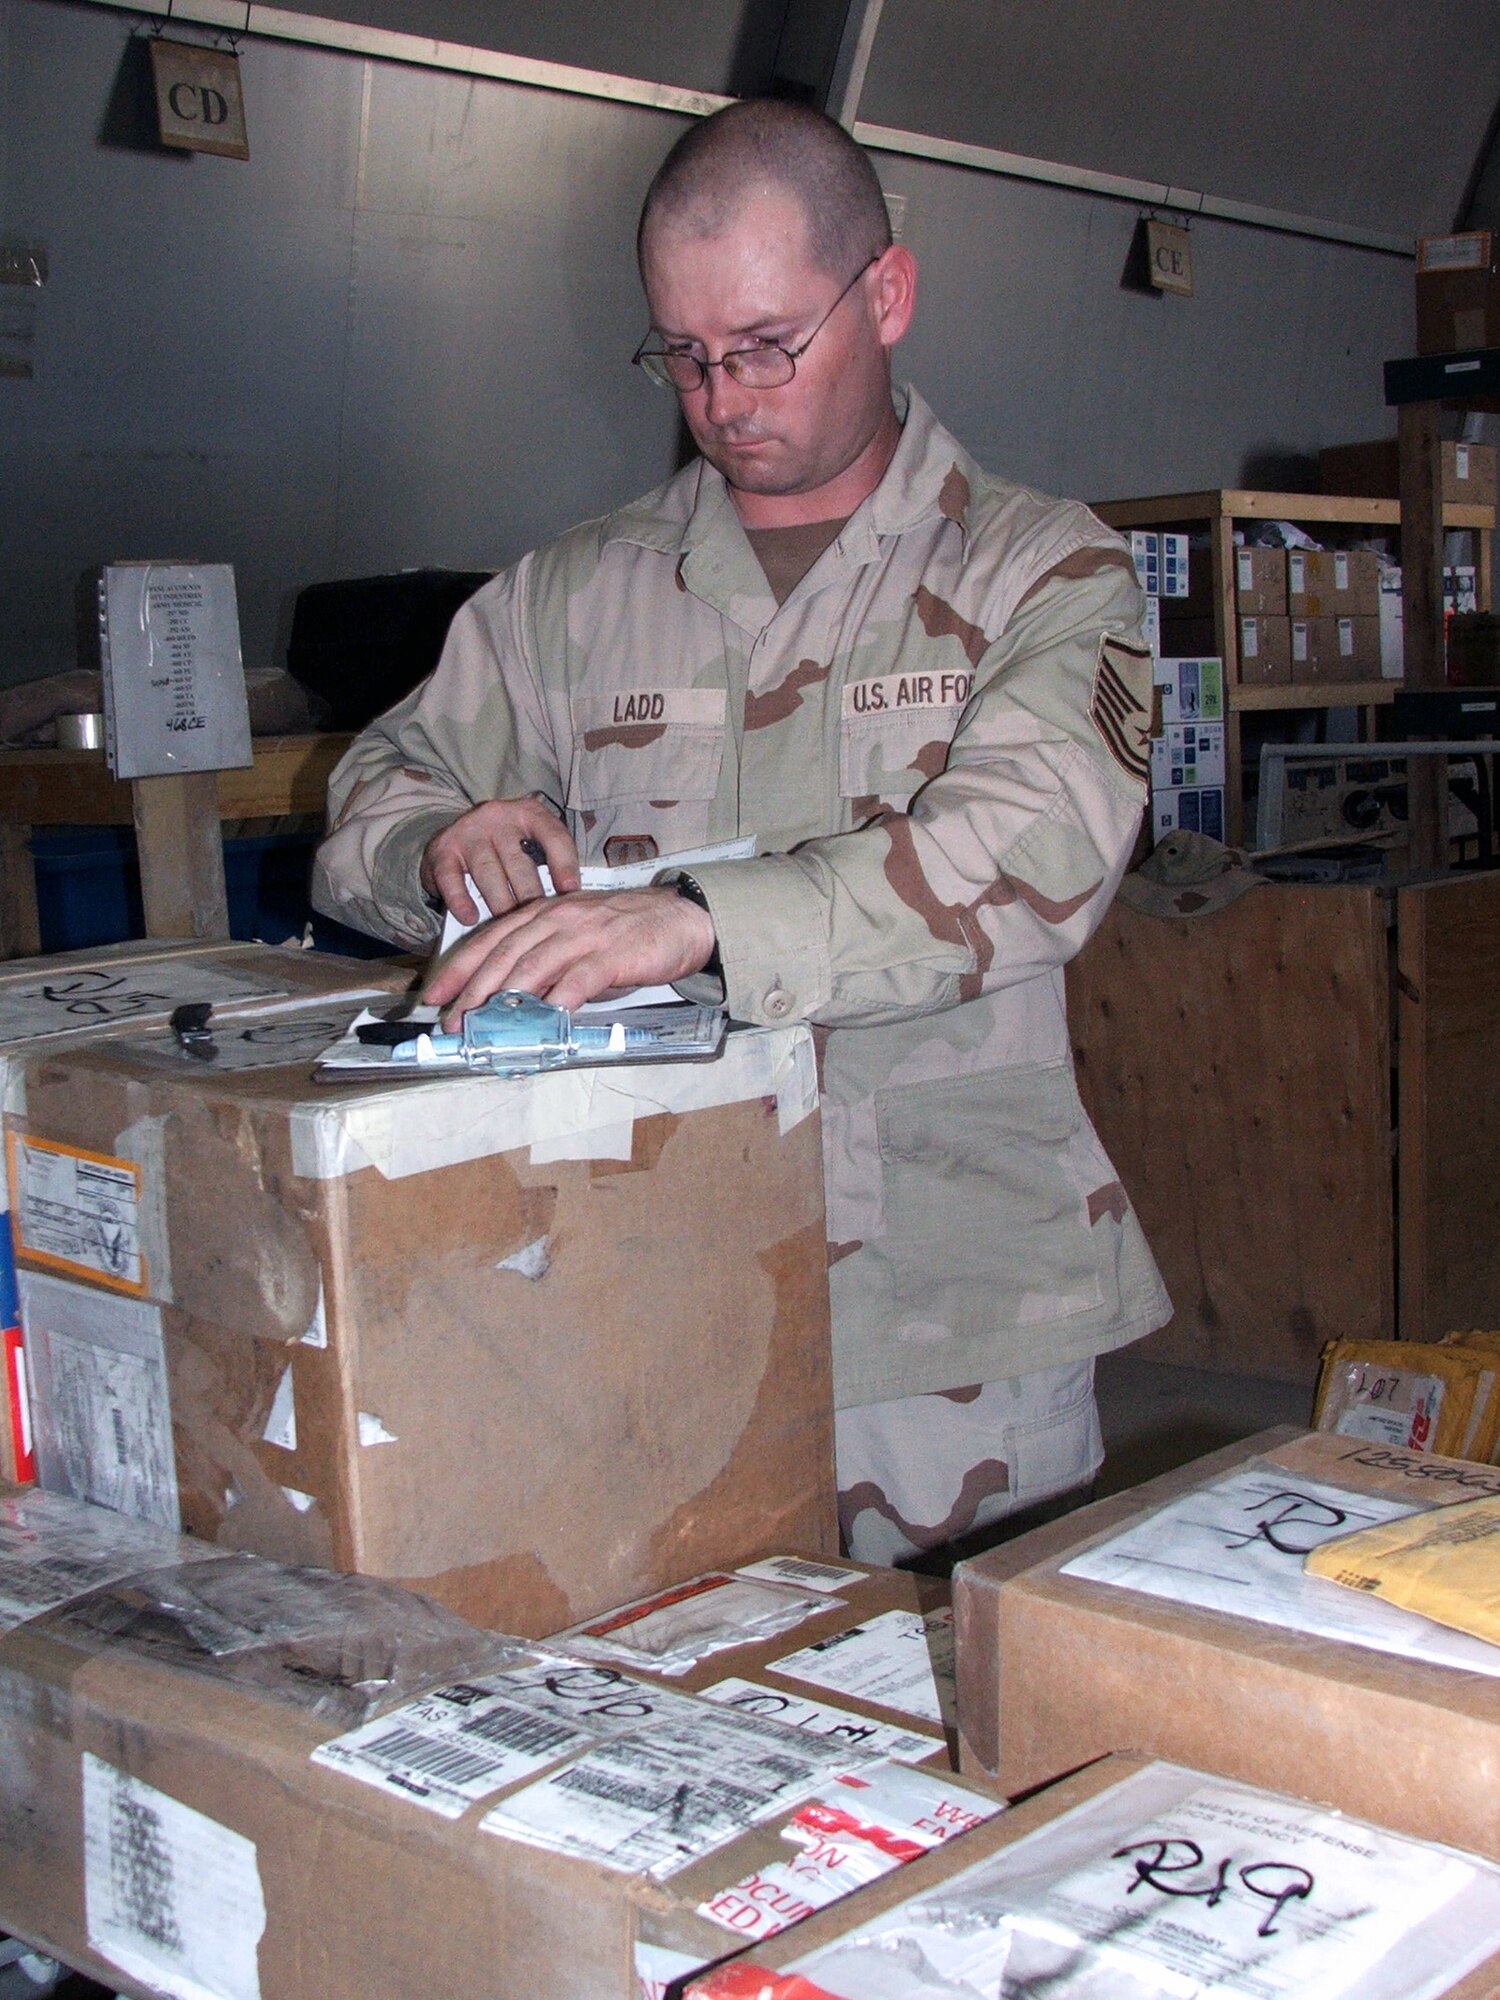 KARSHI-KHANABAD AIR BASE, Uzbekistan -- Master Sgt. Bill Ladd checks in cargo in the supply warehouse here April 26.  He is the superintendent for the 416th Expeditionary Mission Support Squadron's supply section and is deployed from Grand Forks Air Force Base, N.D.  (U.S. Air Force photo by Tech. Sgt. Scott T. Sturkol)